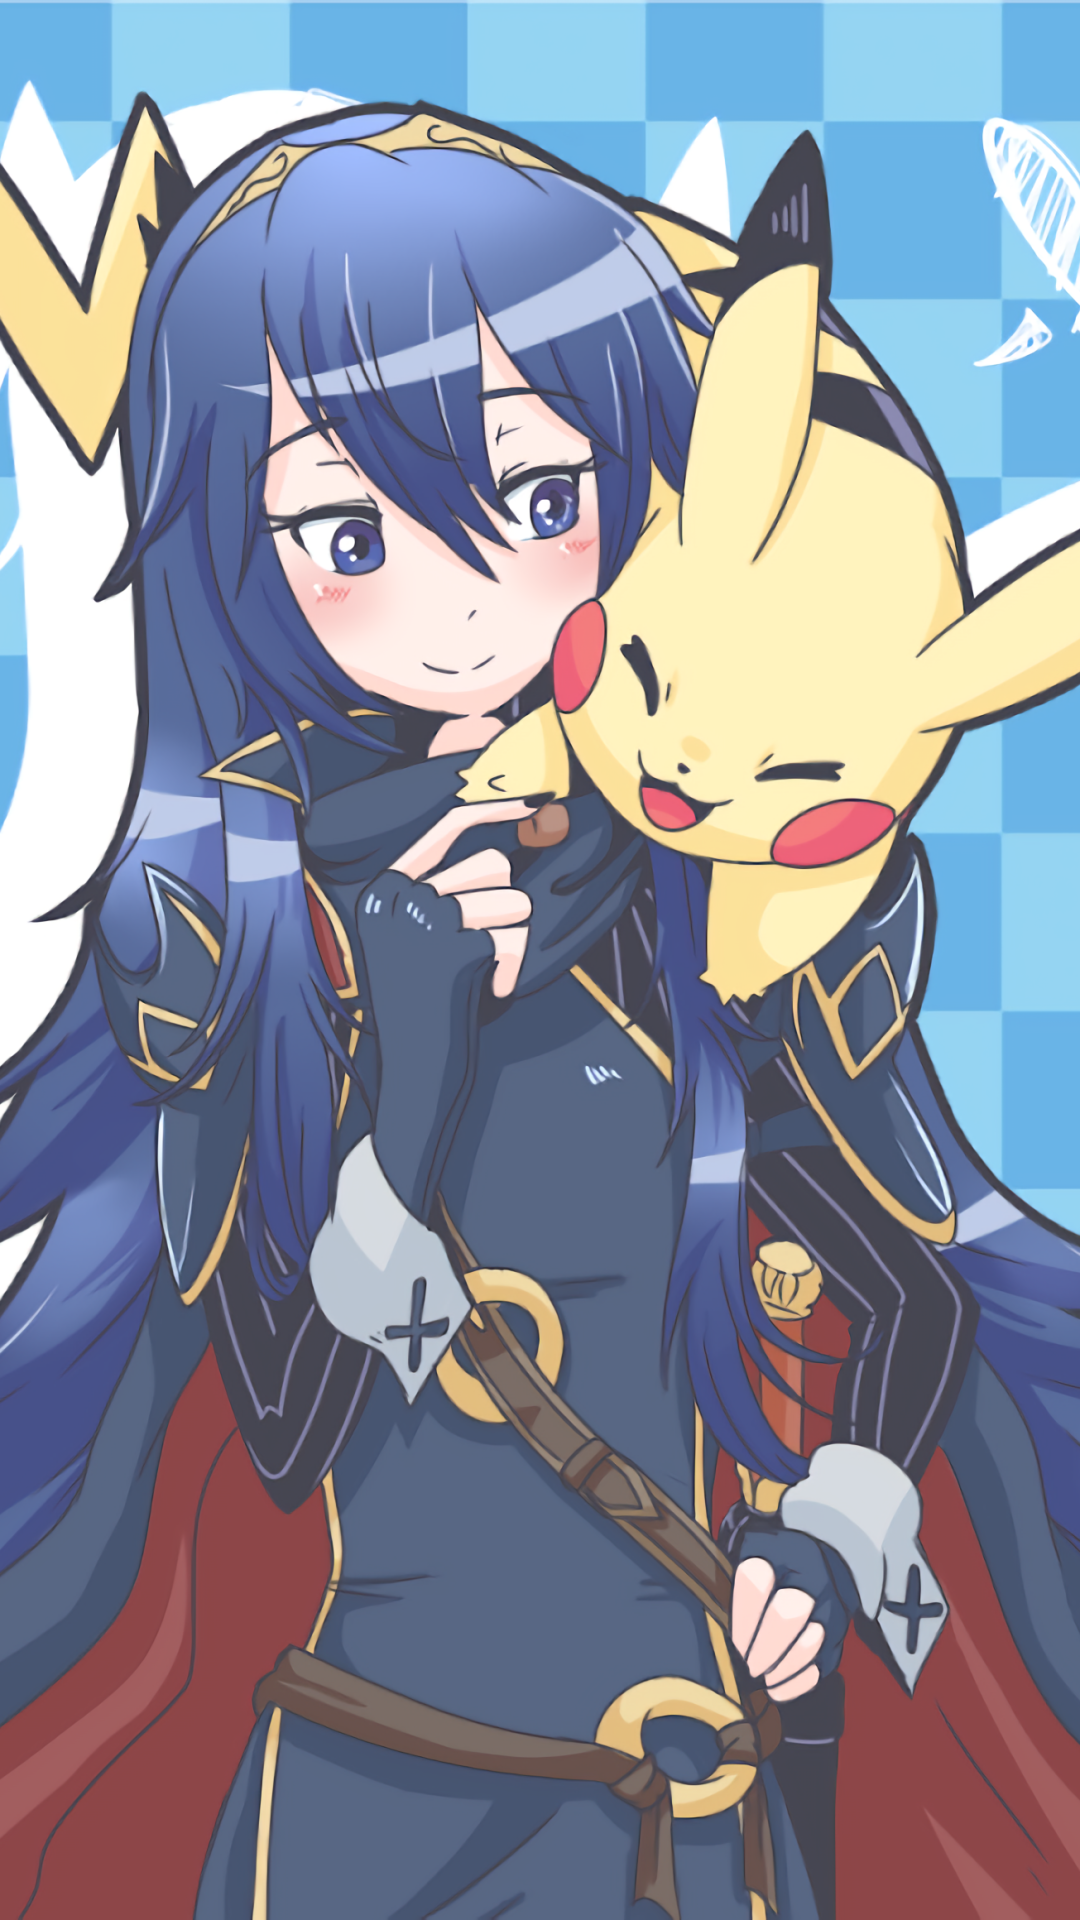 Lucina and Pikachu